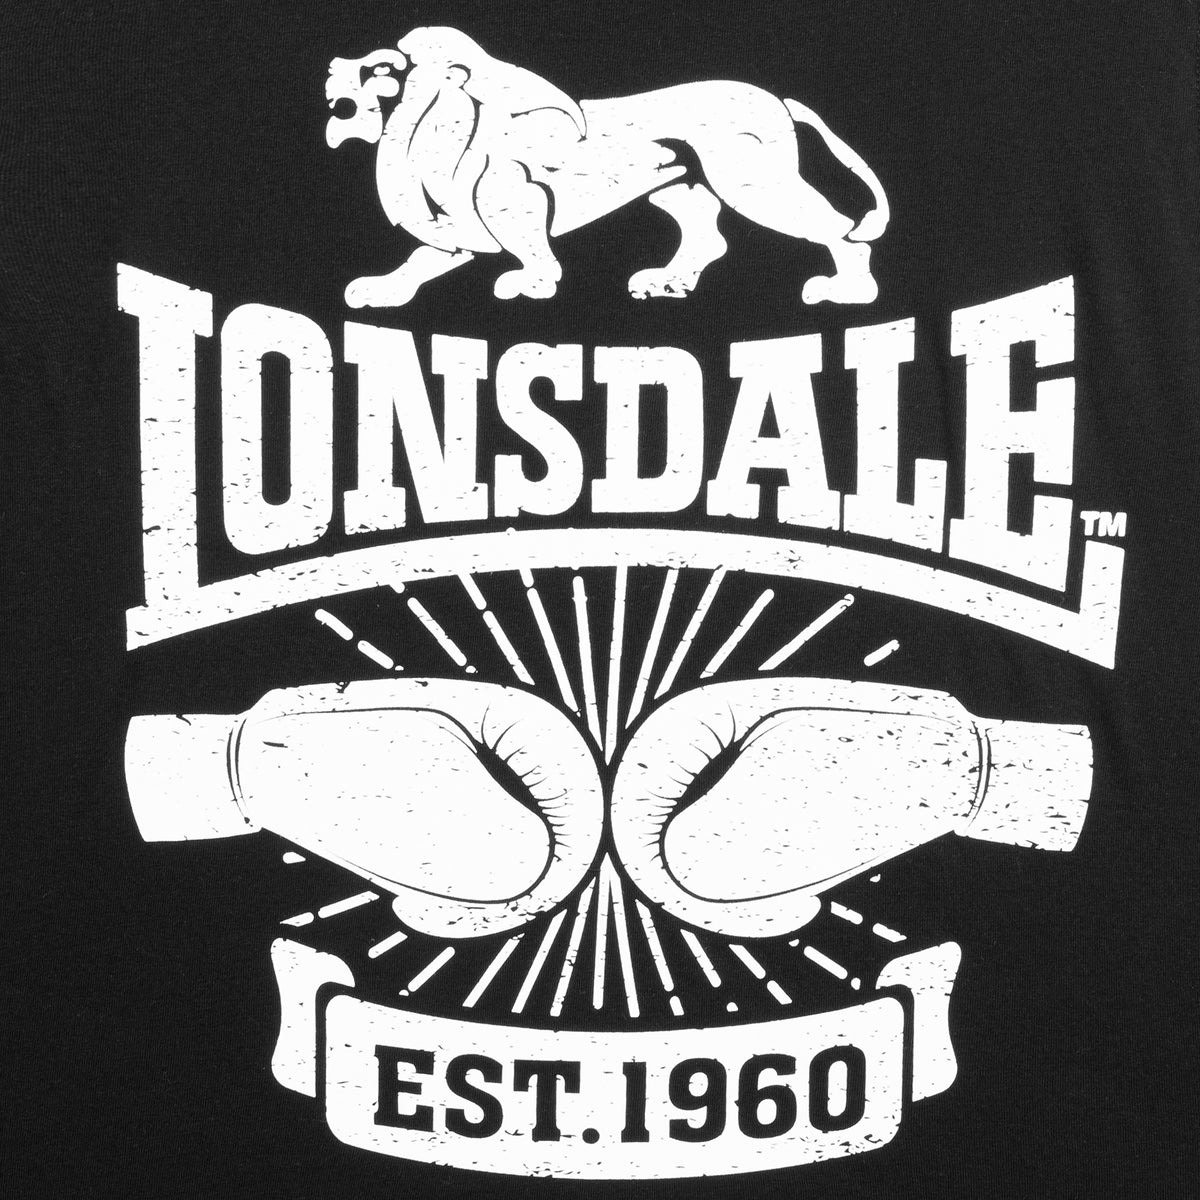 Lonsdale Cleator Tank Top Black